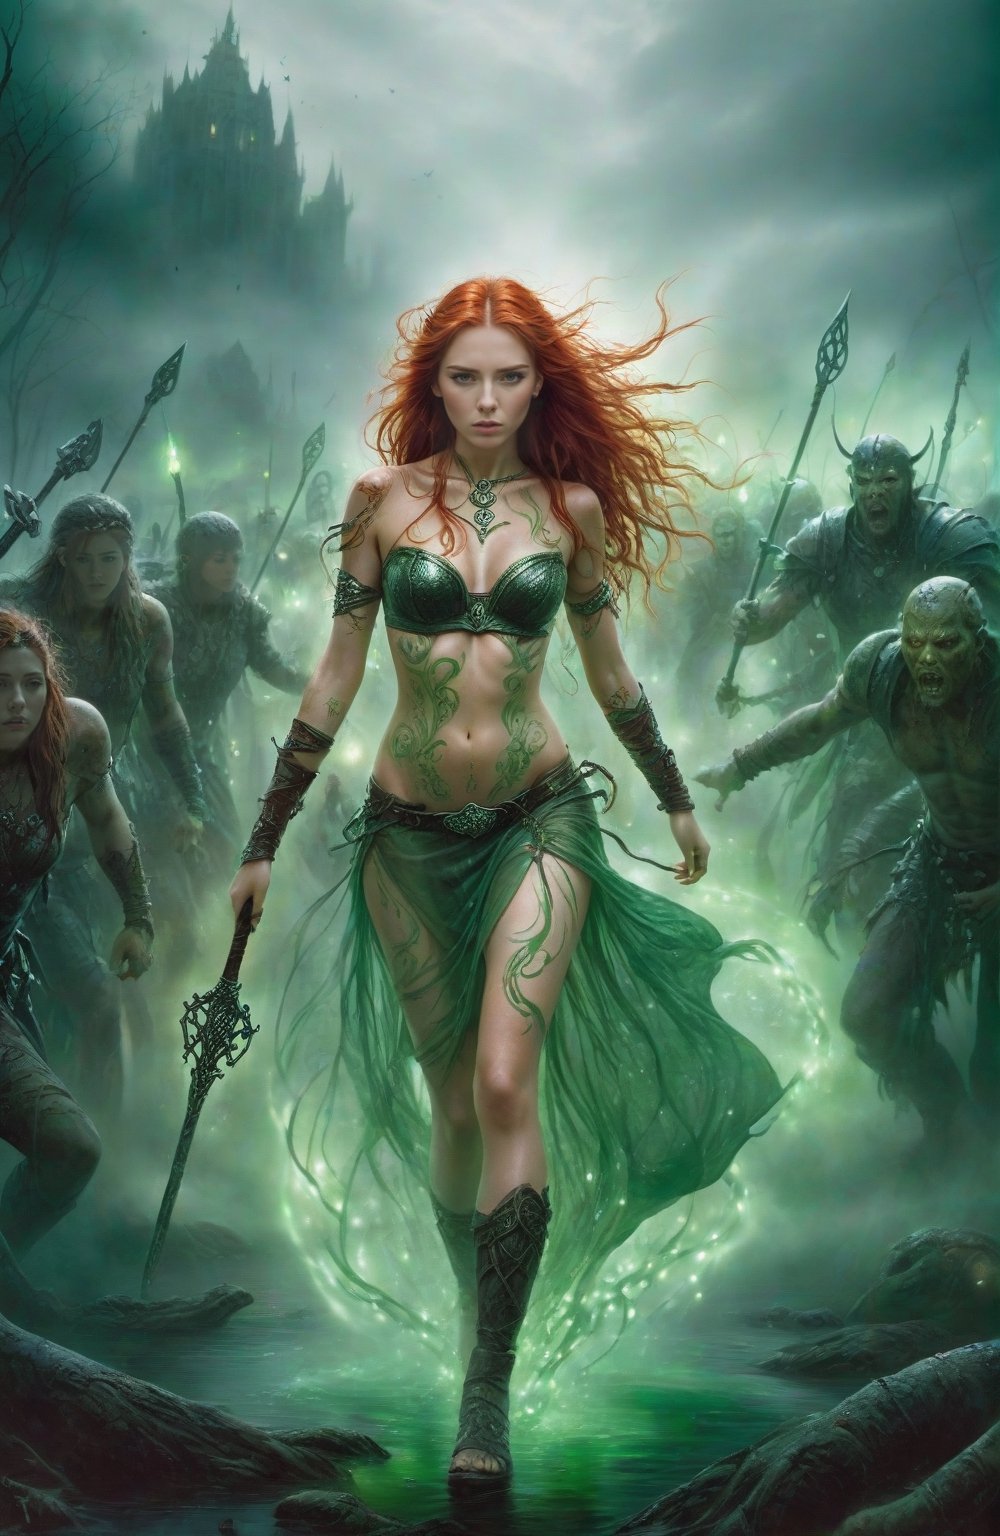  half_naked Celtic woman with long red hair being chased by rotten male zombies with demonic faces in a swamp),  she is holding a long glowing wizards staff and wearing Celtic armor and a tiara,in the fog, every inch of her body is covered in Celtic tattoos, she has body paint on her breasts but not her nipples, you can see her shoes, green mist flows through and around her body,  she is engulfed in swirling green lights, very long legs, an hourglass figure, show feet, and Celtic shoes, she is standing you can see her shoes, 
, detailed background, dark night))), [SEP] 
 freckled pale skin, shoulder length hair, In a sinister crumbling city.,